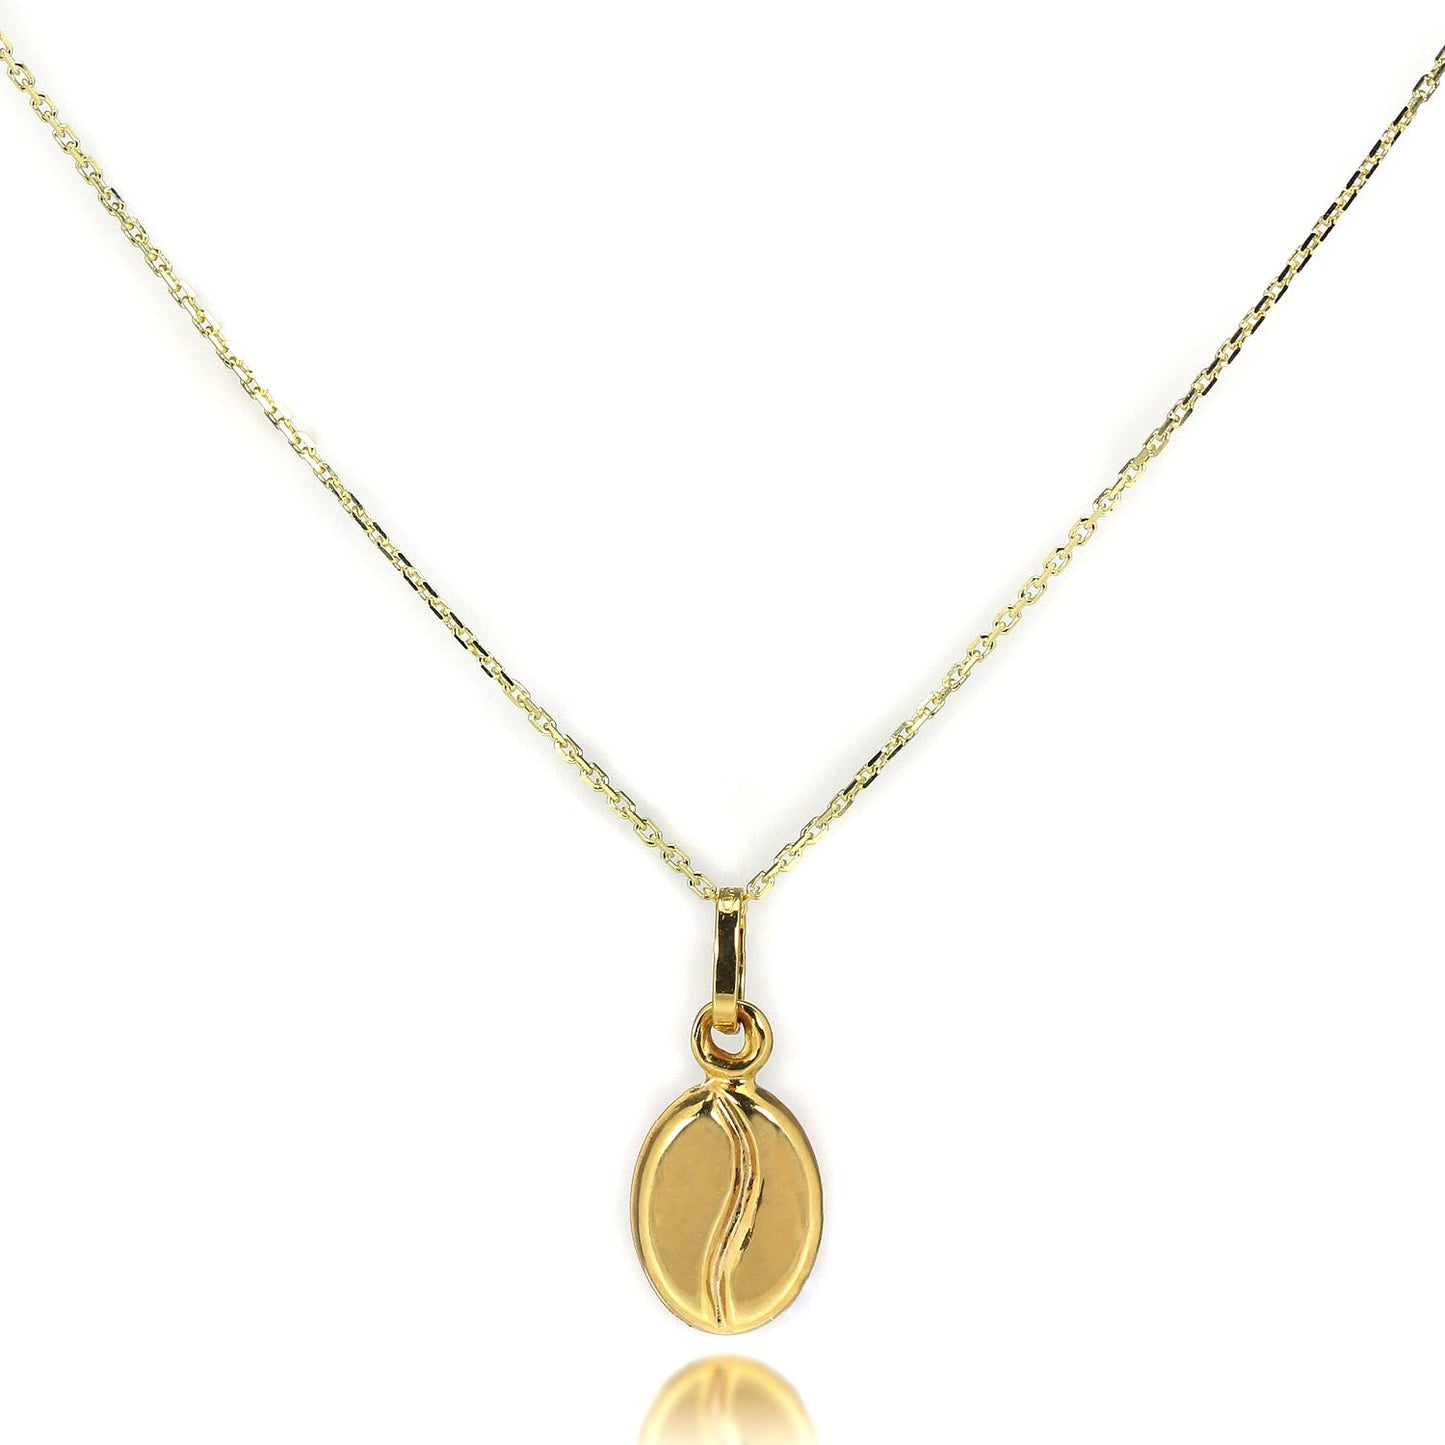 9ct Gold Coffee Bean Necklace - 16 - 20 Inches